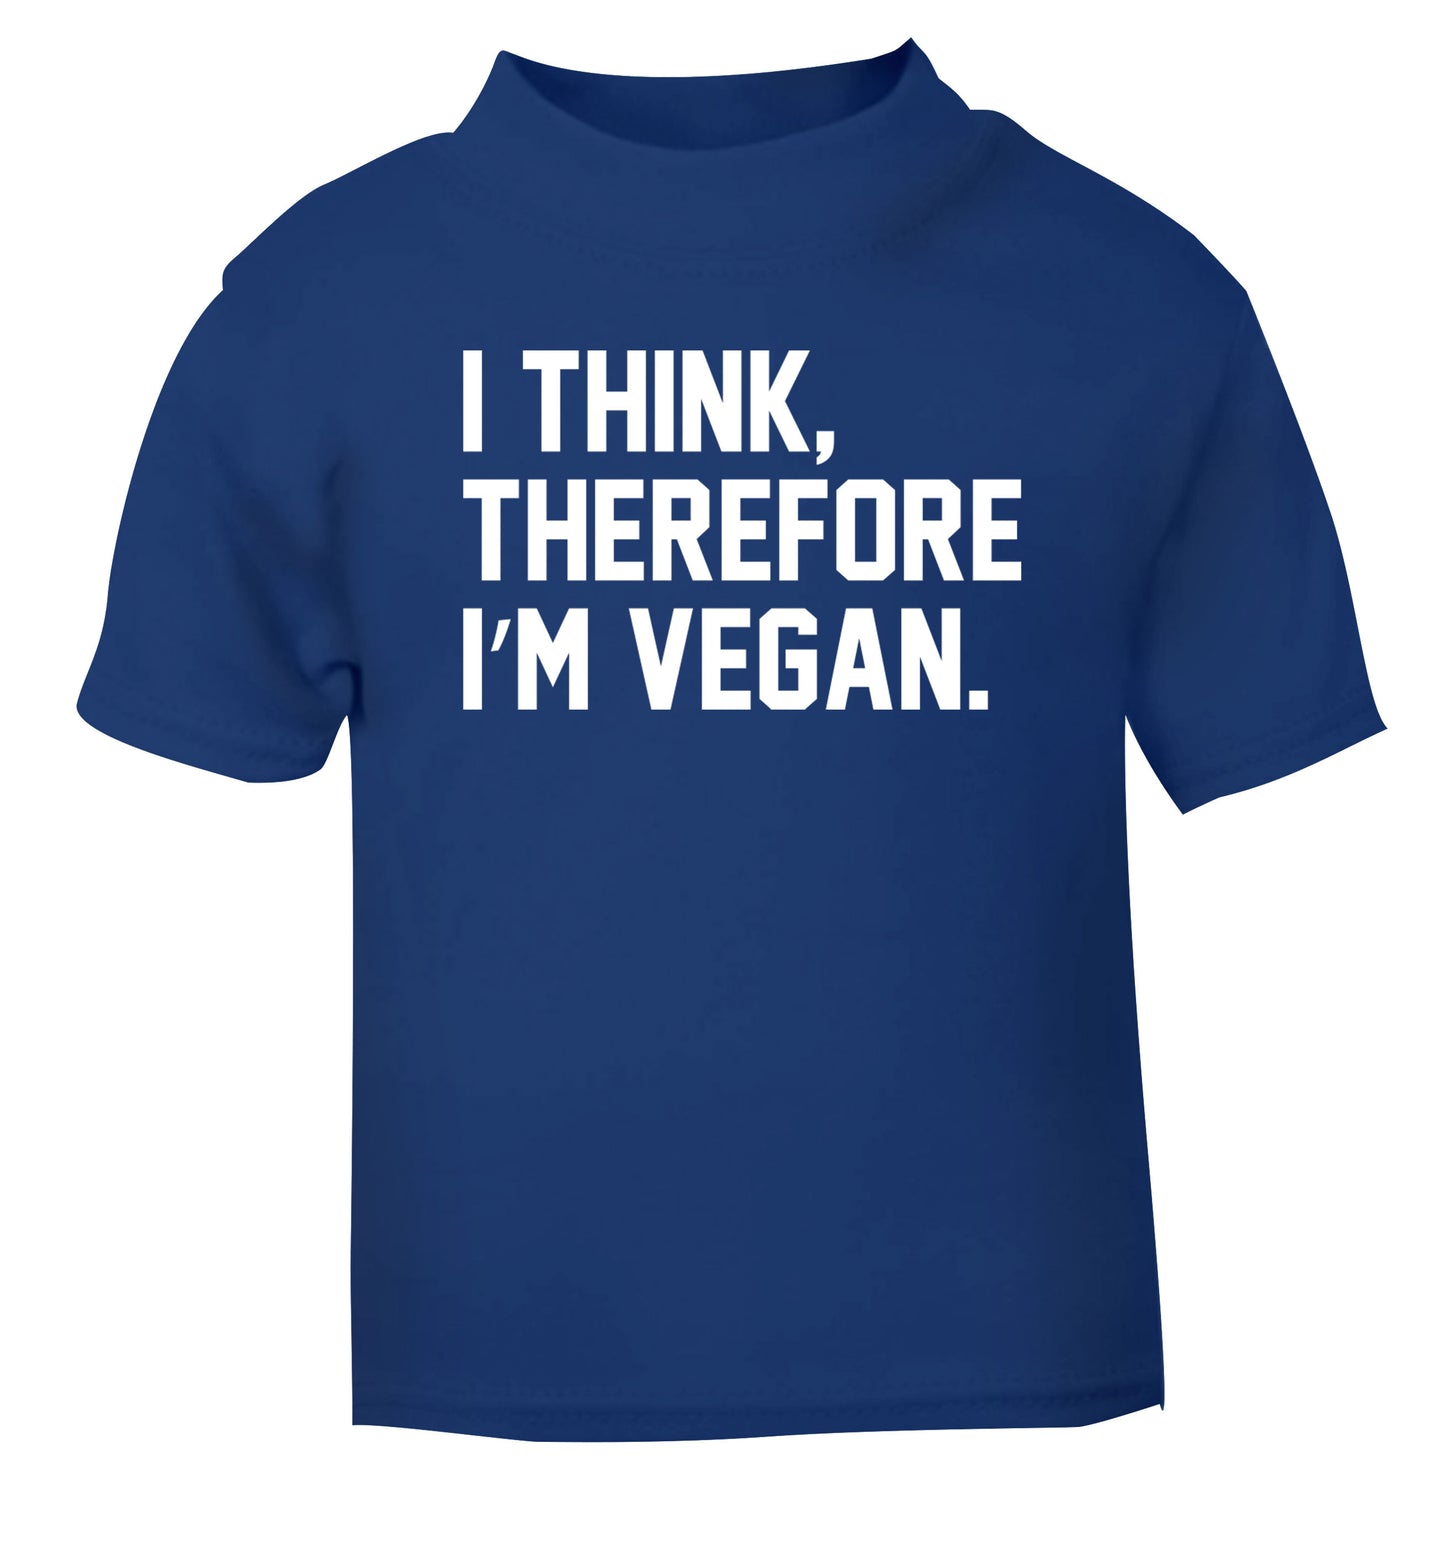 I think therefore I'm vegan blue Baby Toddler Tshirt 2 Years